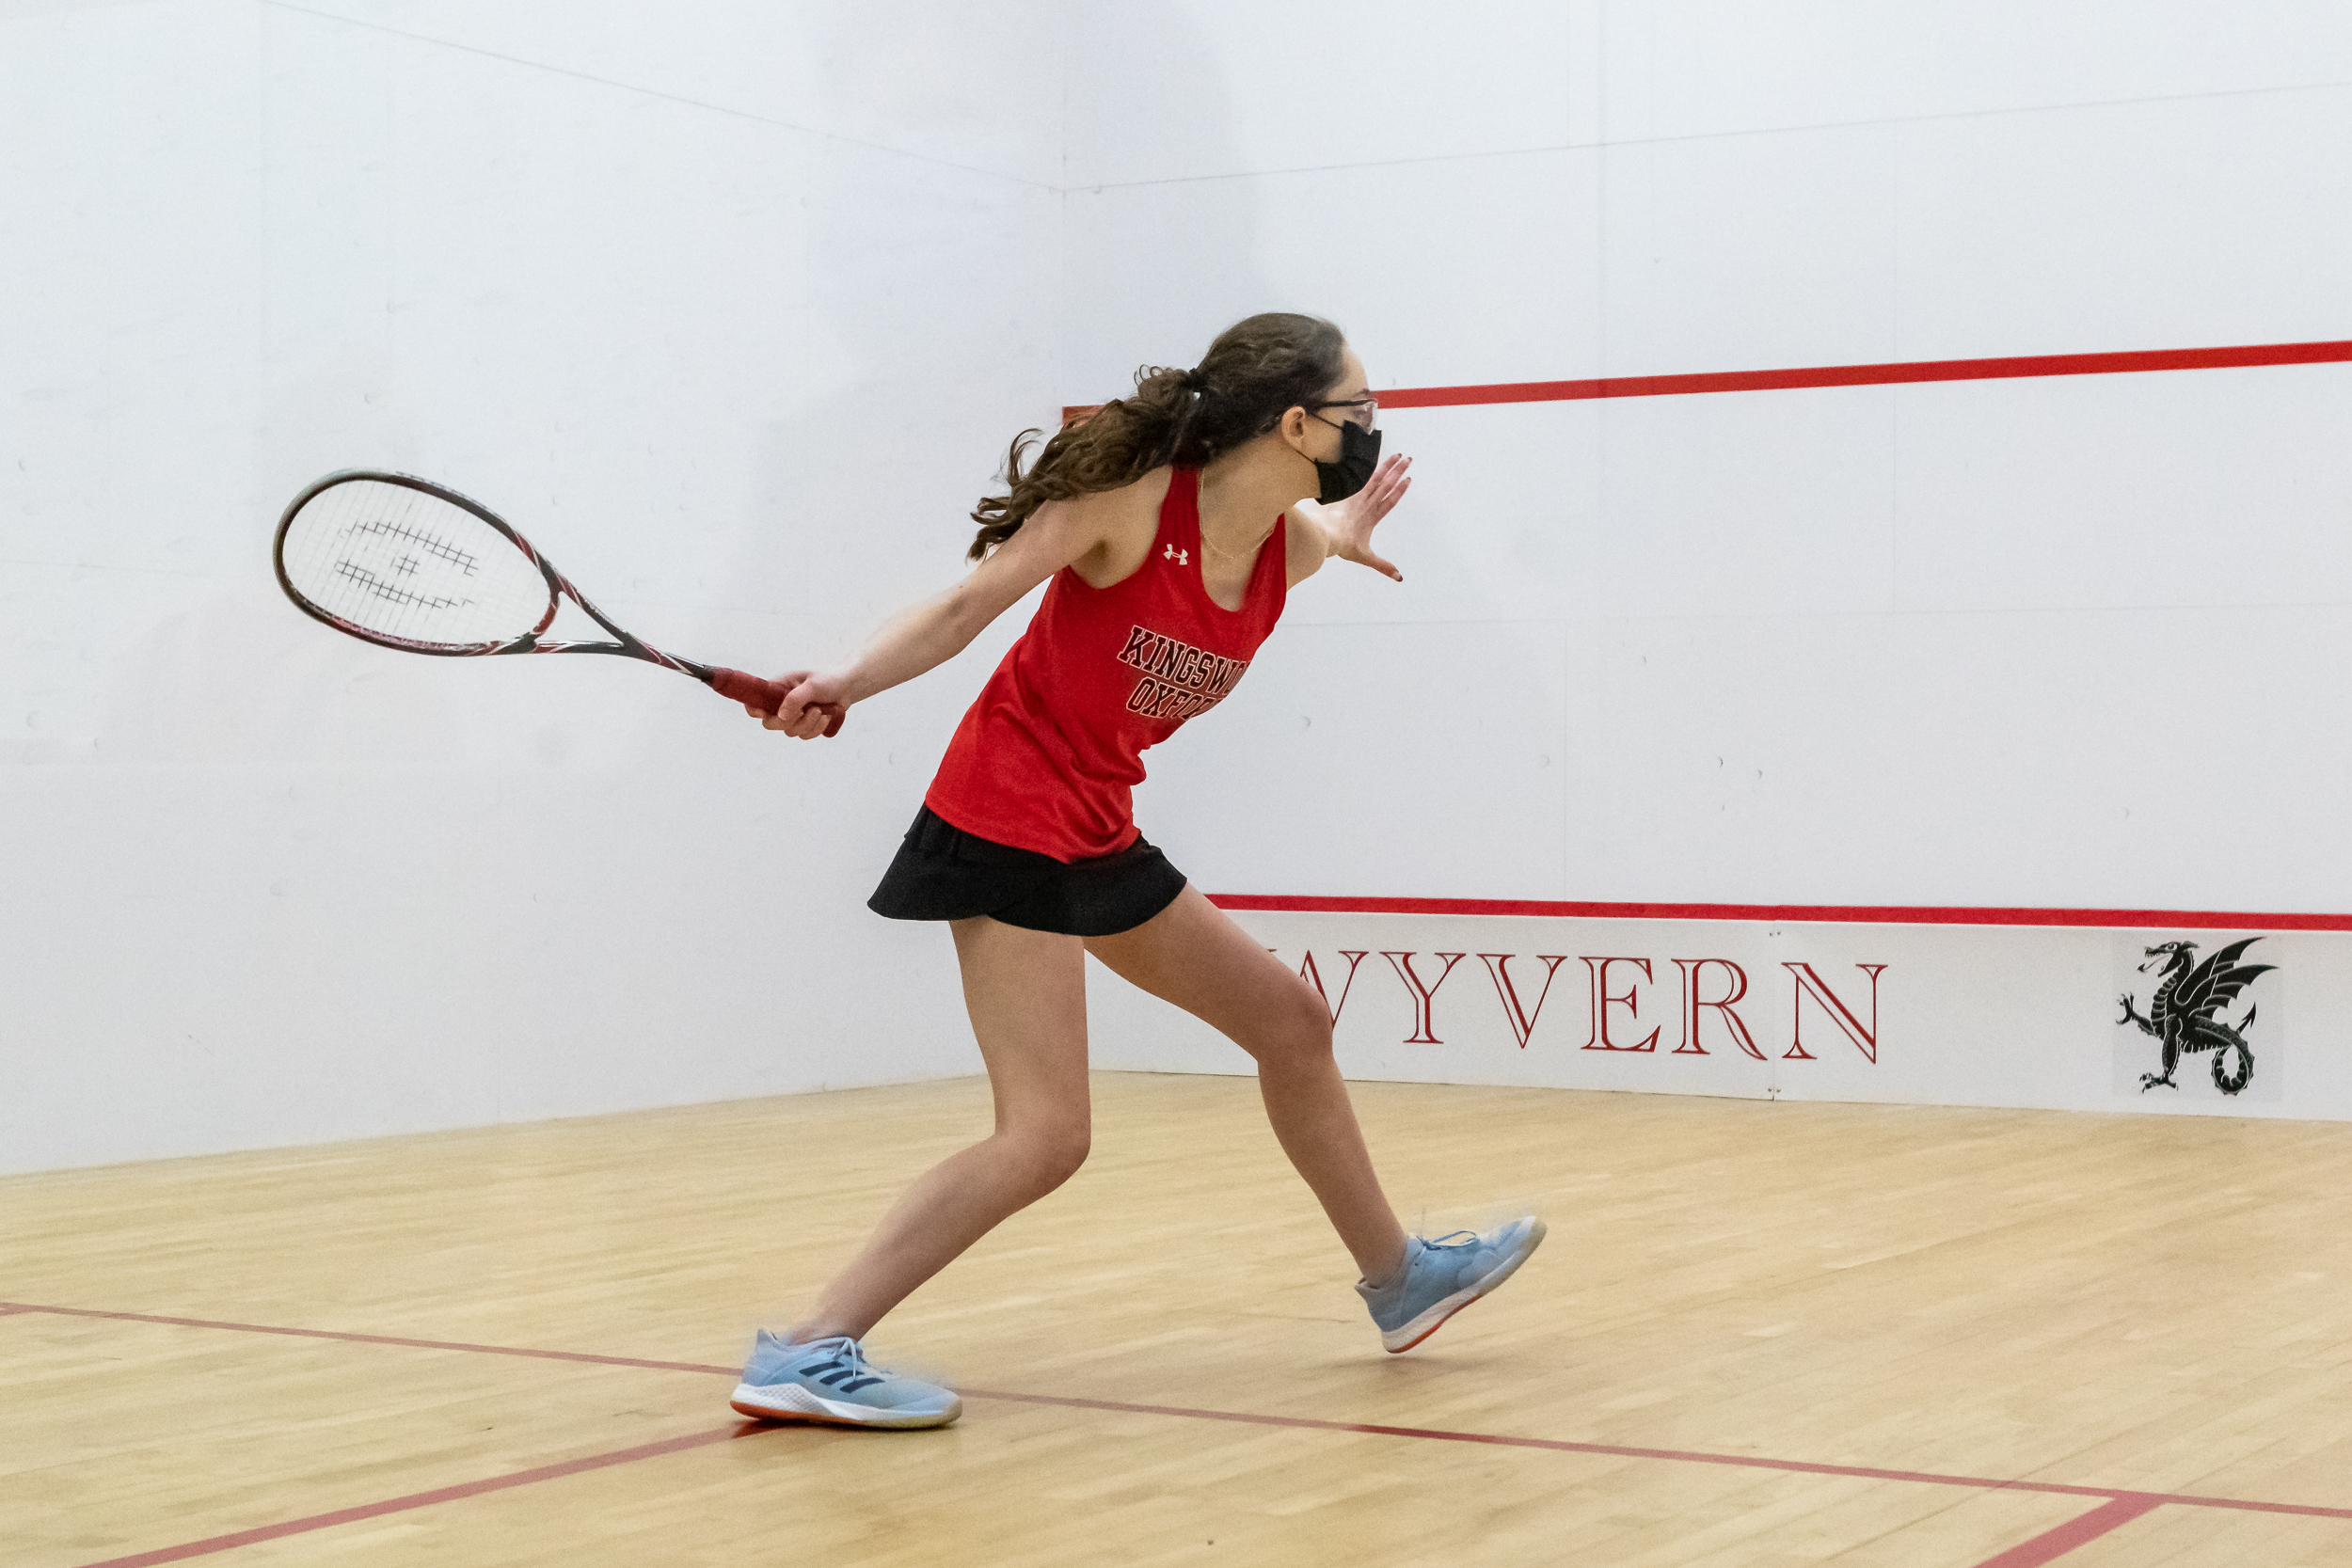 Girls play competitive sports and squash at Kingswood Oxford in West Hartford